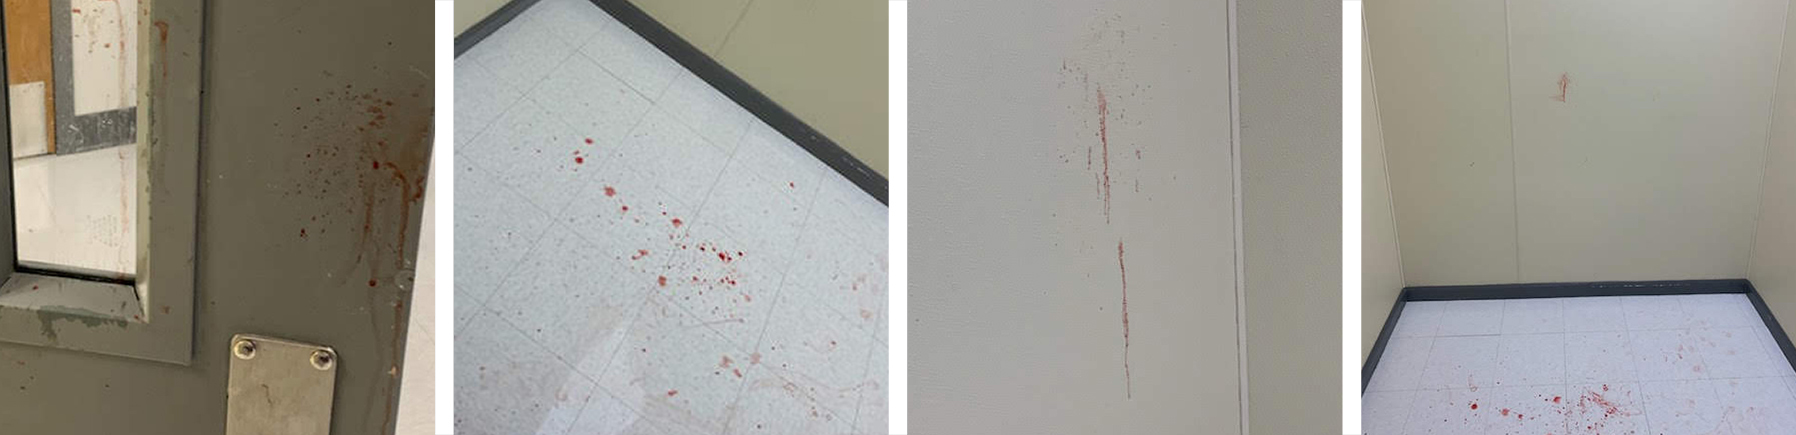 Four photos of a small, empty room with white tiles and a white wall show splattered blood in different areas.